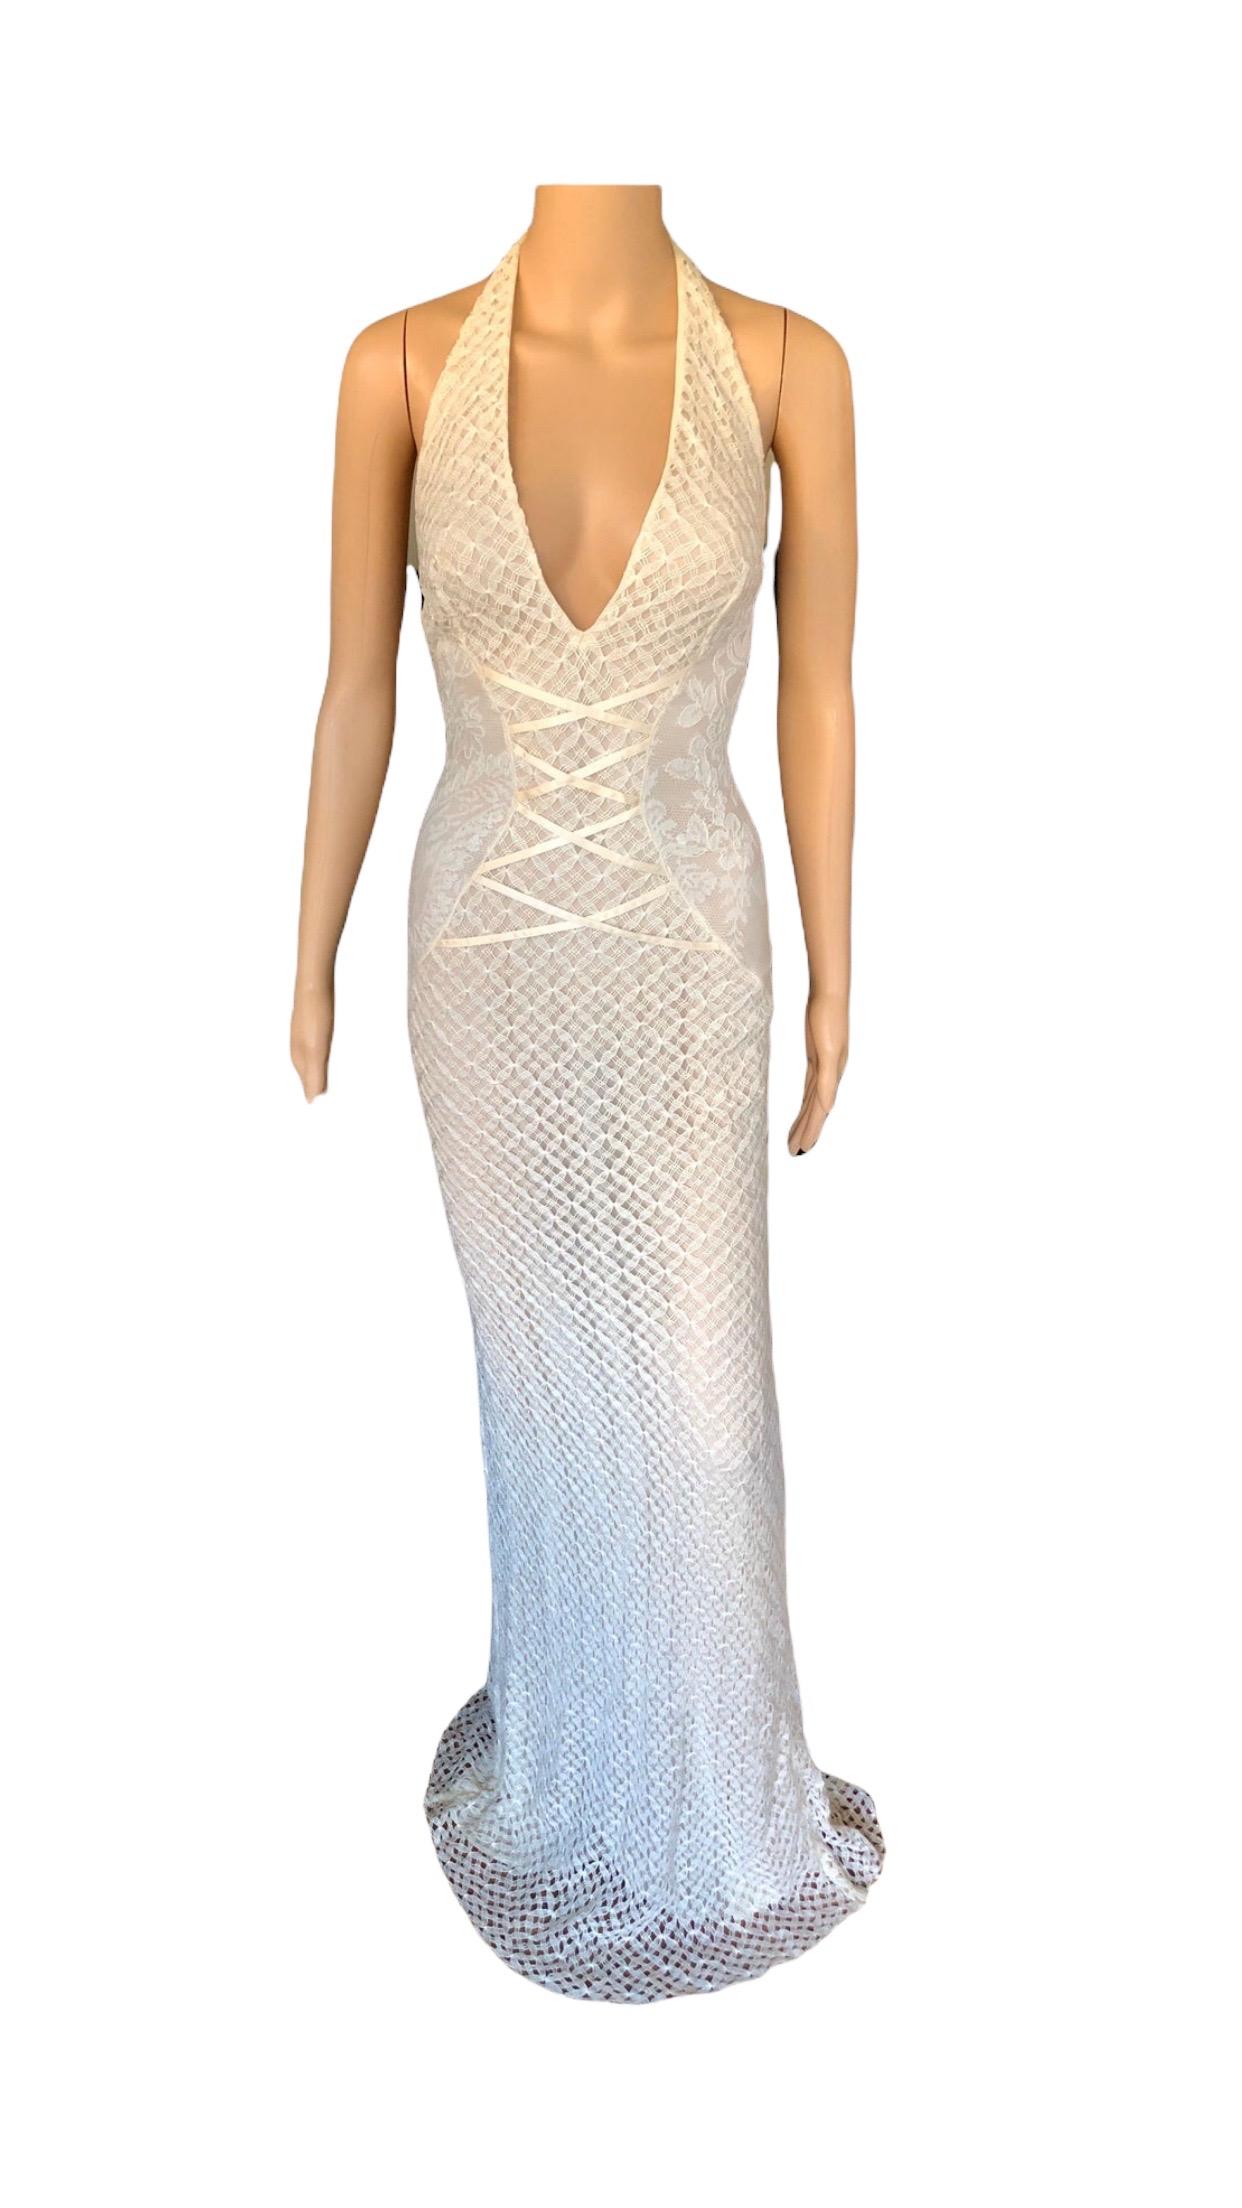 NWT Gianni Versace S/S 2002 Plunging Backless Semi Sheer Lace Ivory Dress Gown For Sale 6